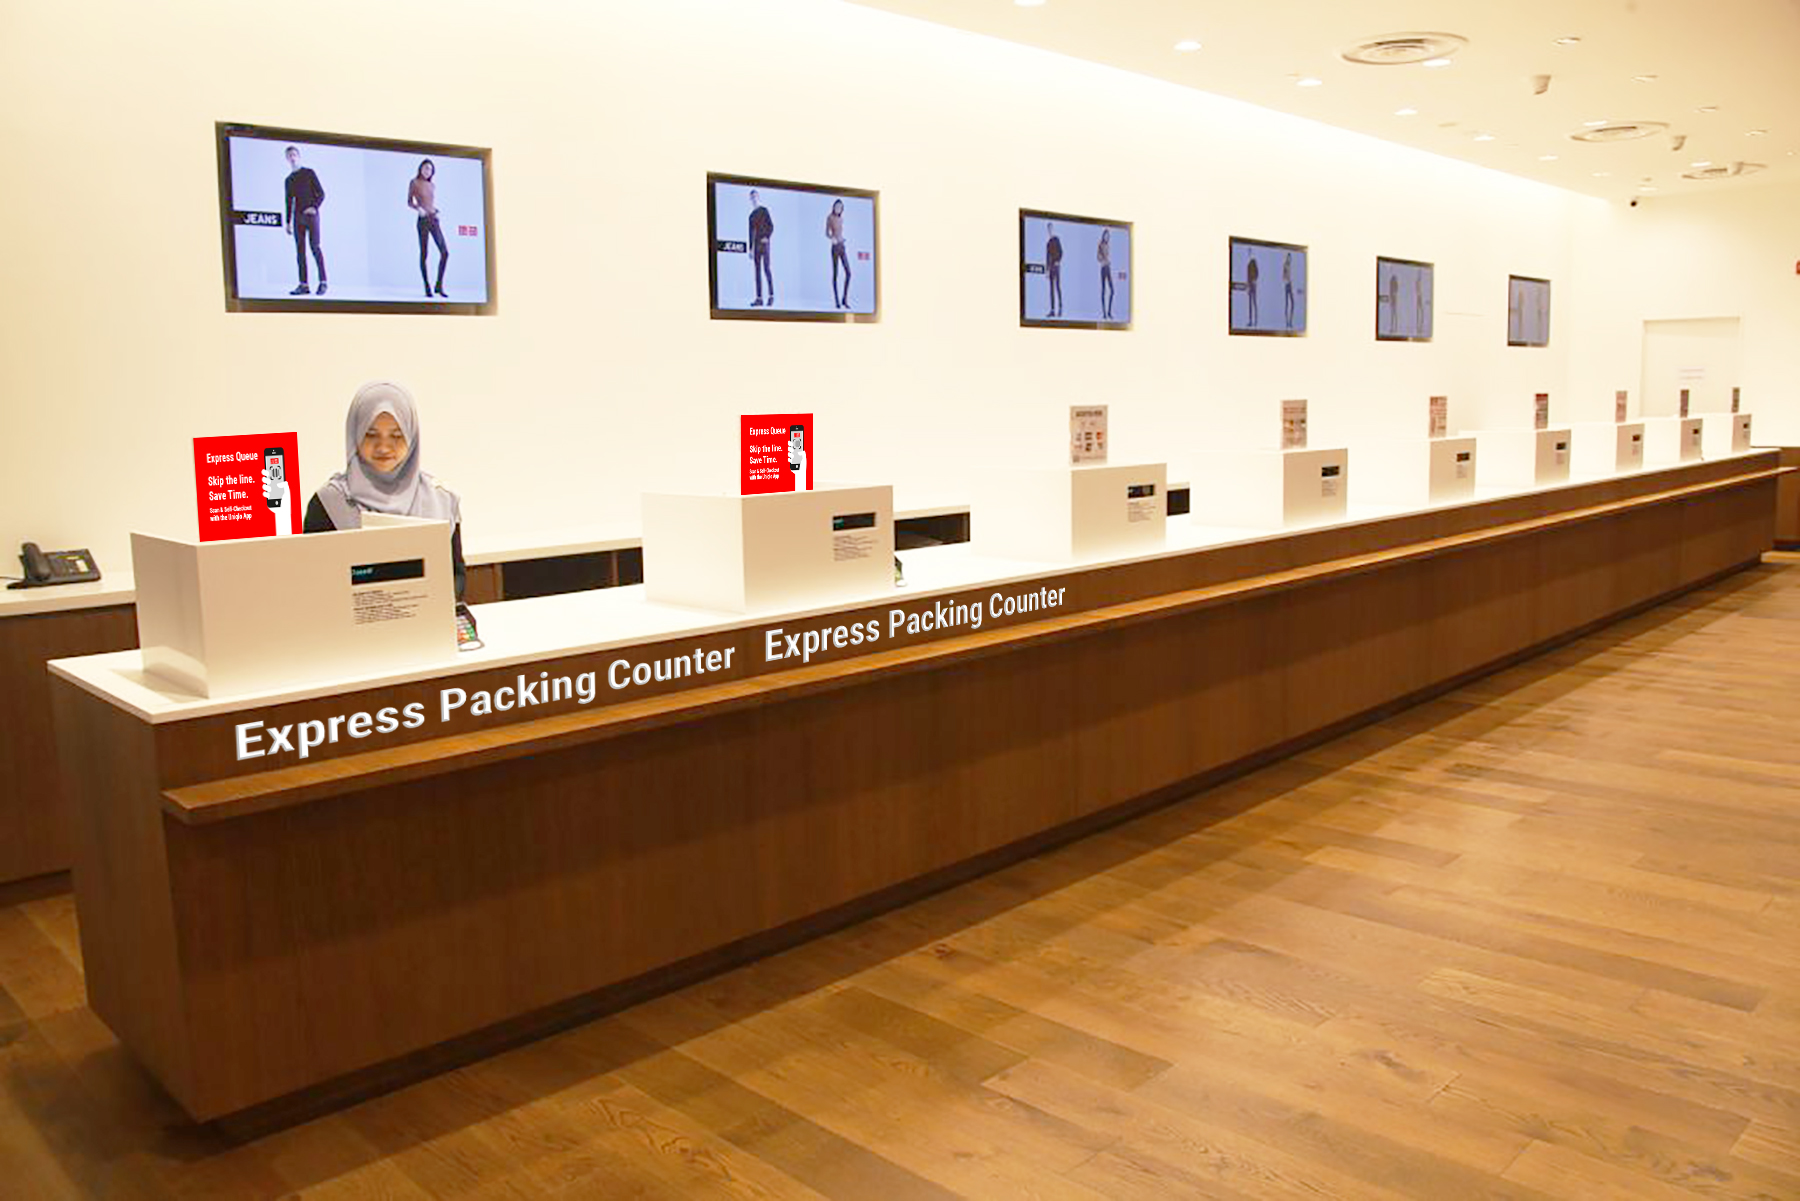 General Assembly Singapore - Uniqlo Self-Checkout Mobile App - Express Packing Counter - Leowhouteng